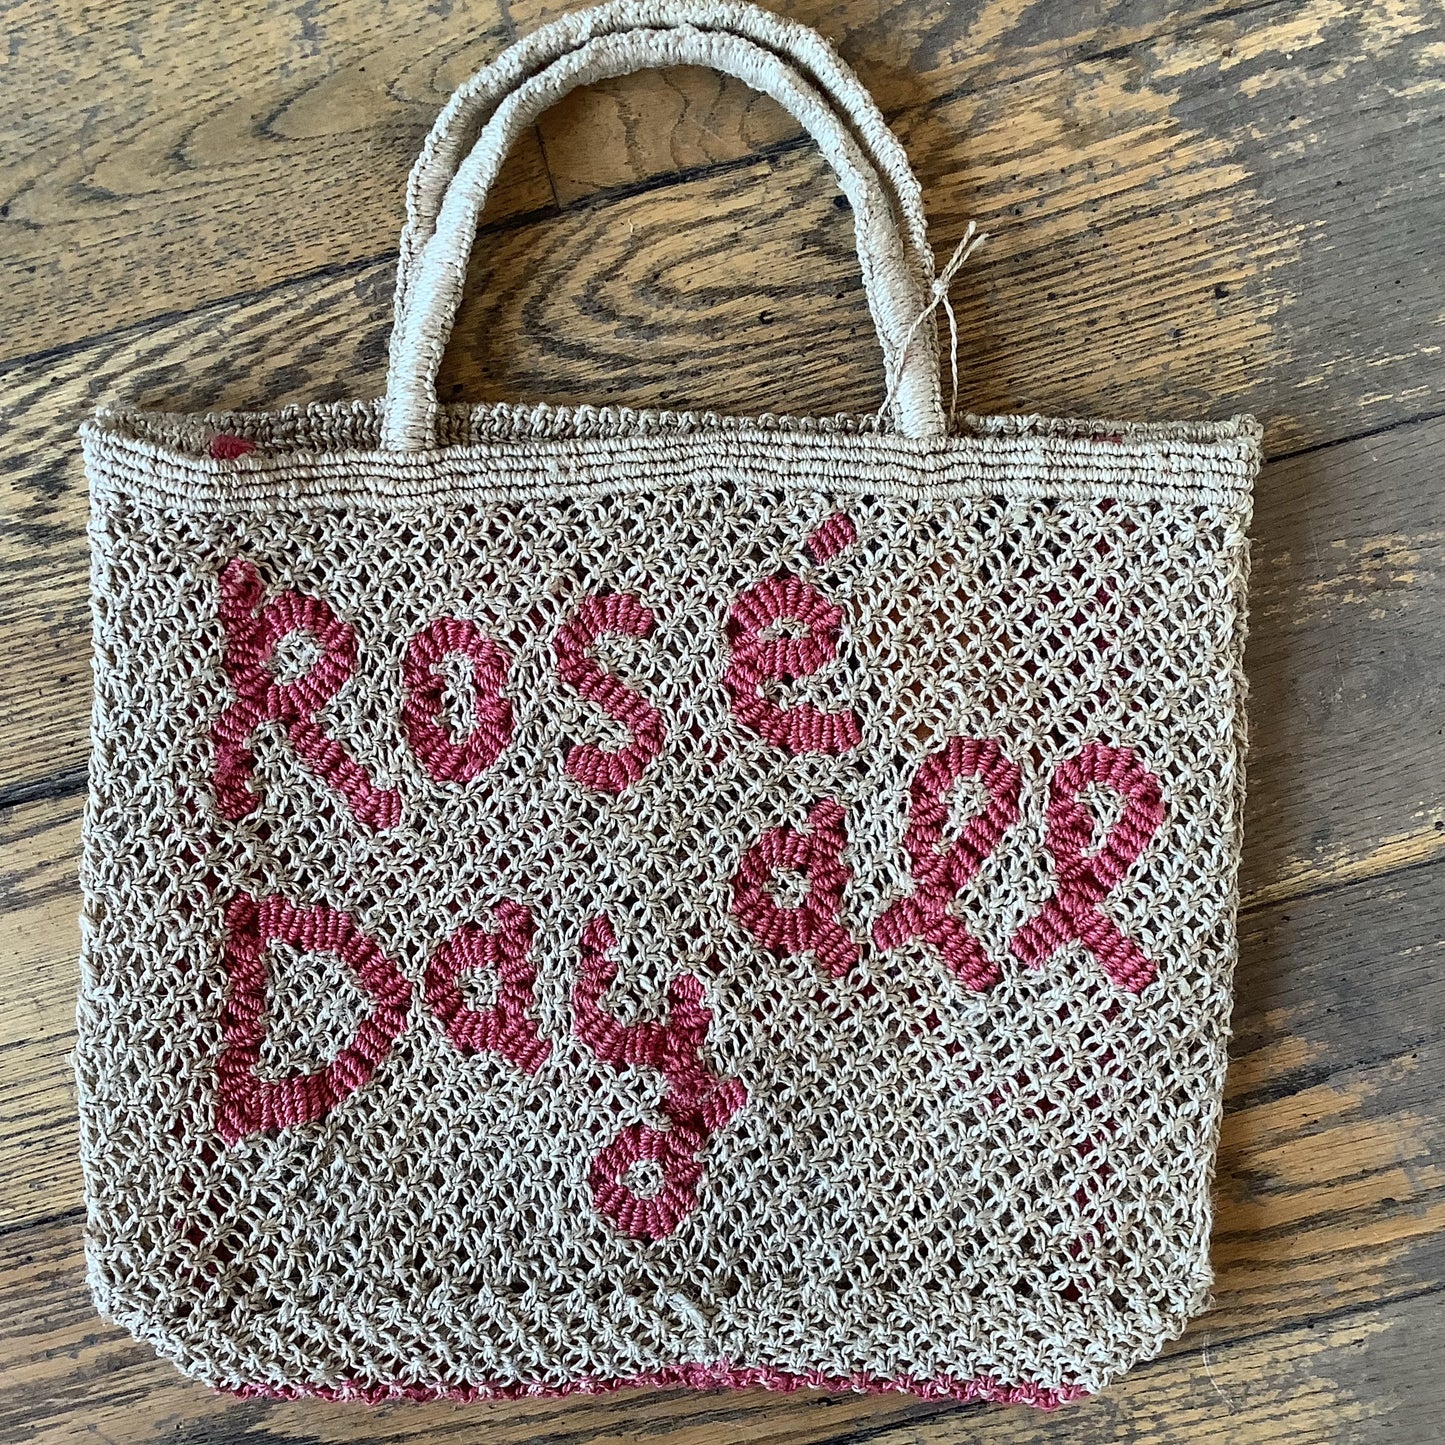 Jacksons "Rose All Day" Small Tote